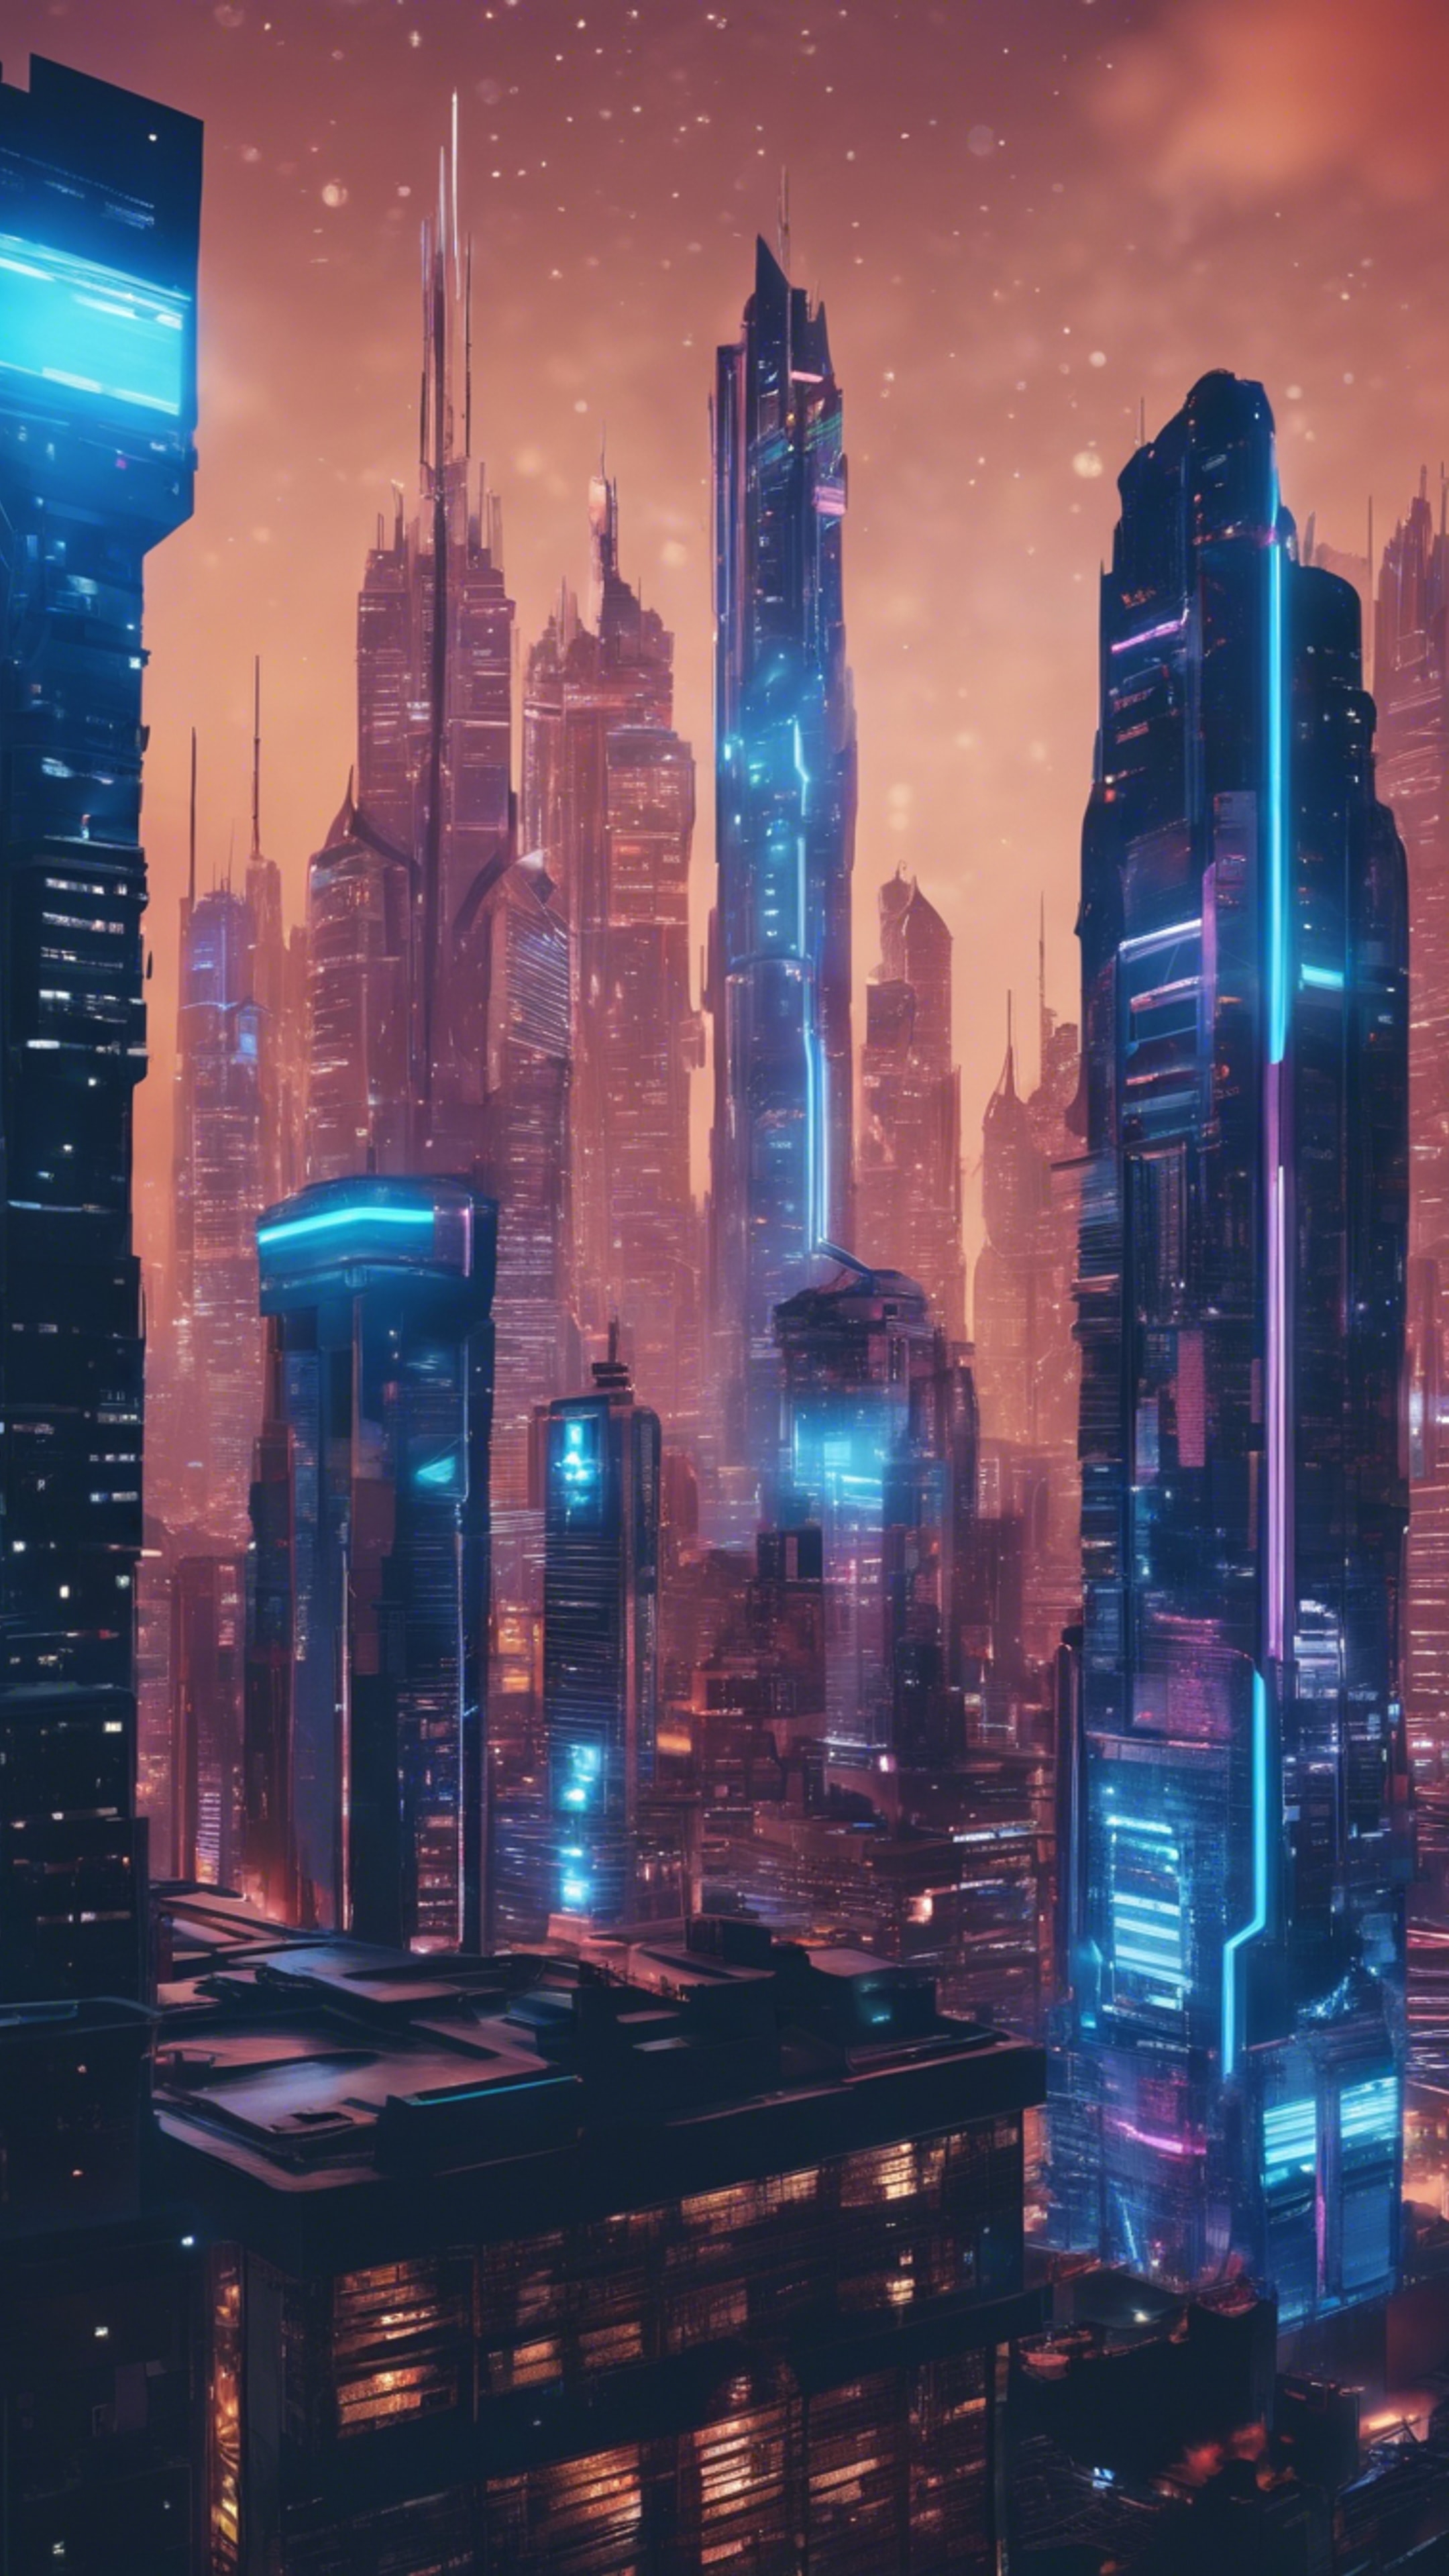 A futuristic city glowing with vibrant neon-blue lights and skyscrapers piercing the night sky. Обои[2f3a3bdee3e14a4e9359]